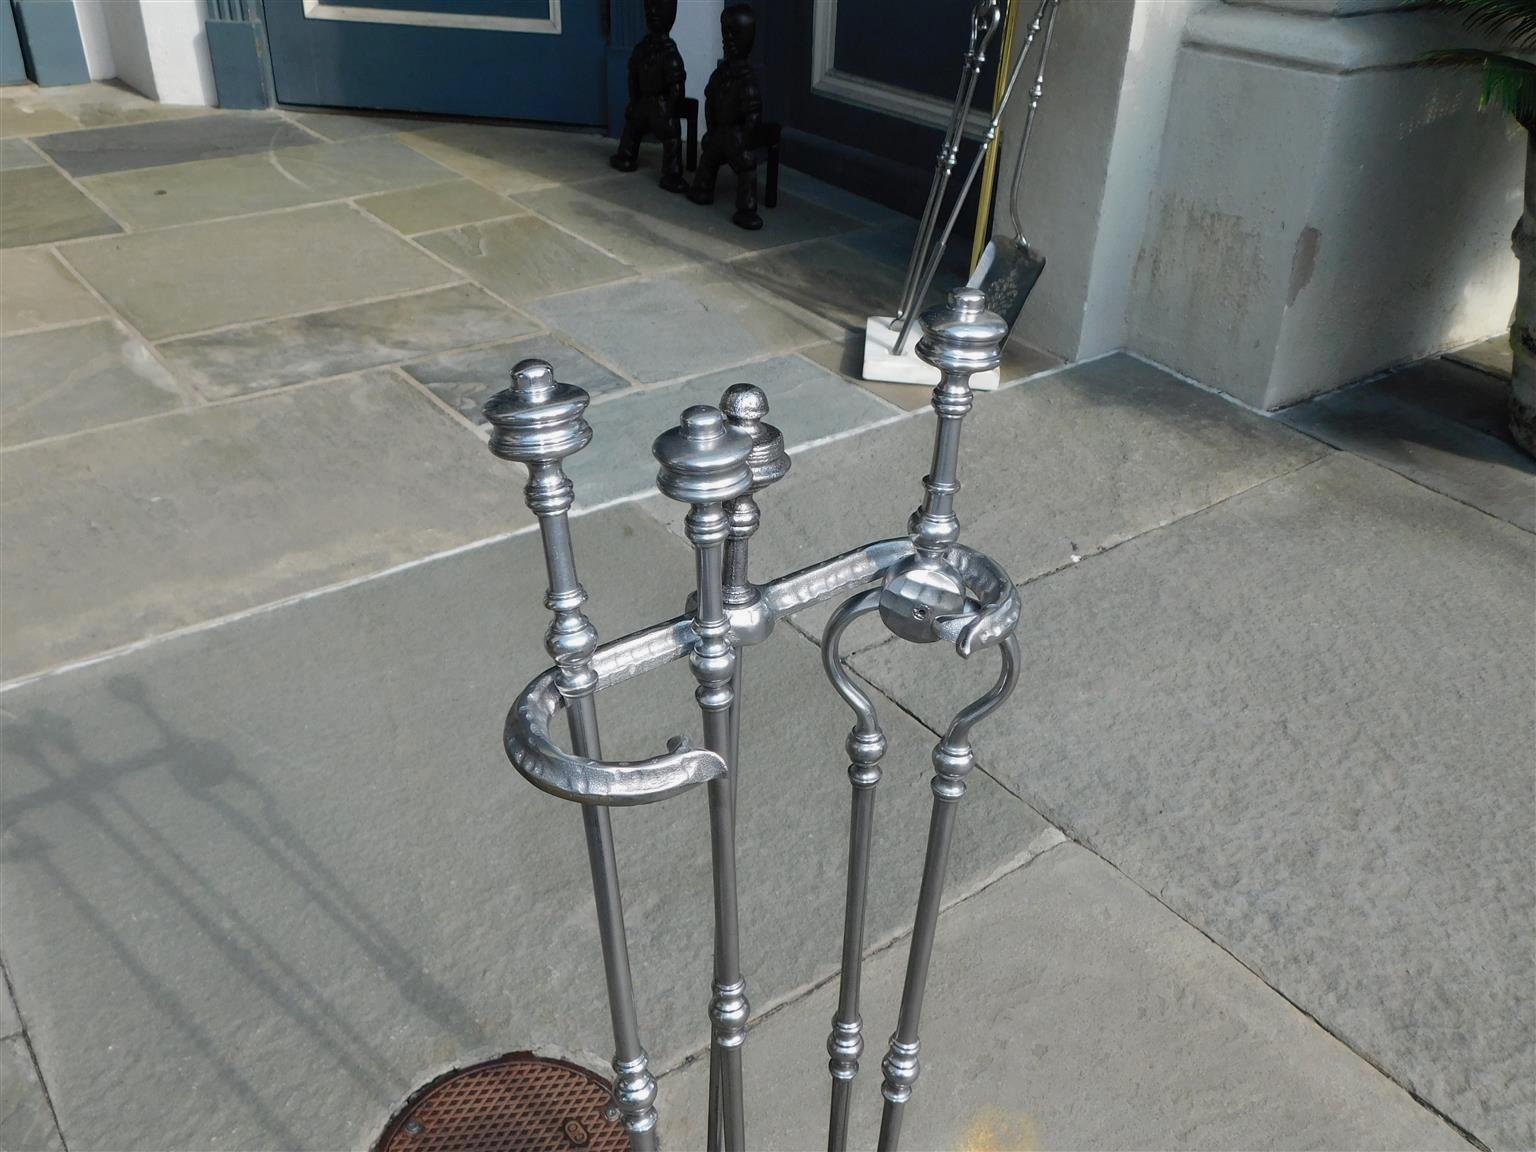 Mid-19th Century Set of English Polished Steel Urn Finial Fire Place Tools on Stand, C. 1840 For Sale